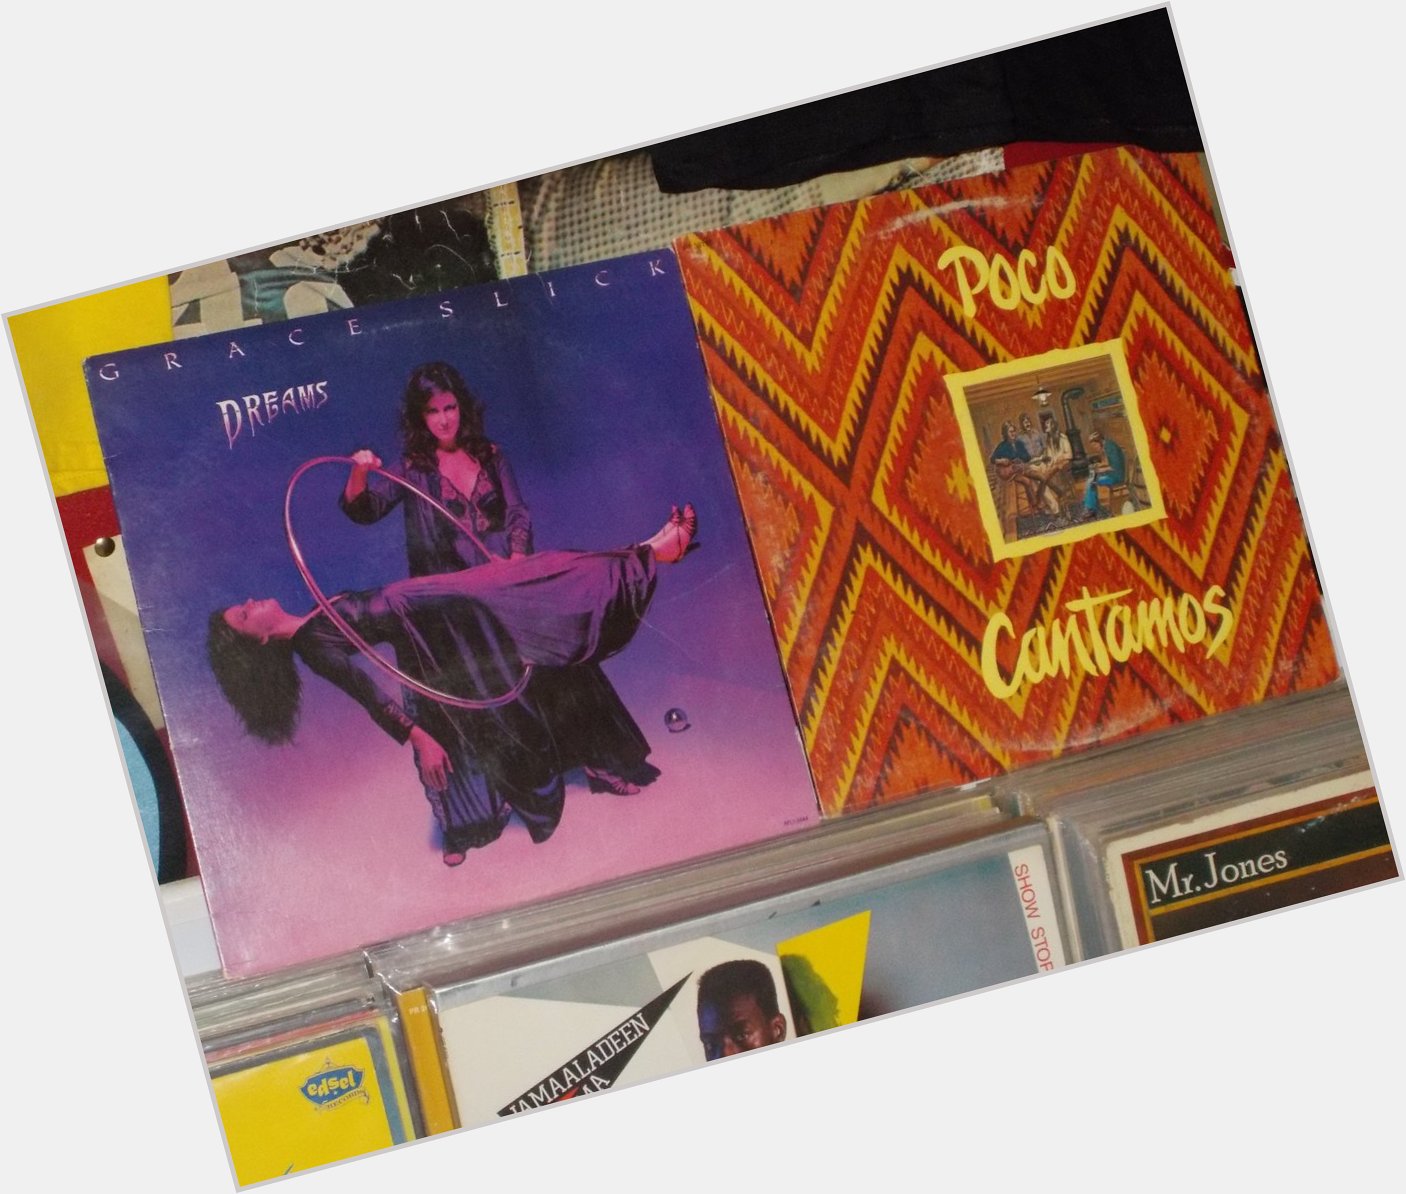 Happy Birthday to Grace Slick (Jefferson Airplane) and Timothy B. Schmidt of Poco (& Eagles) 